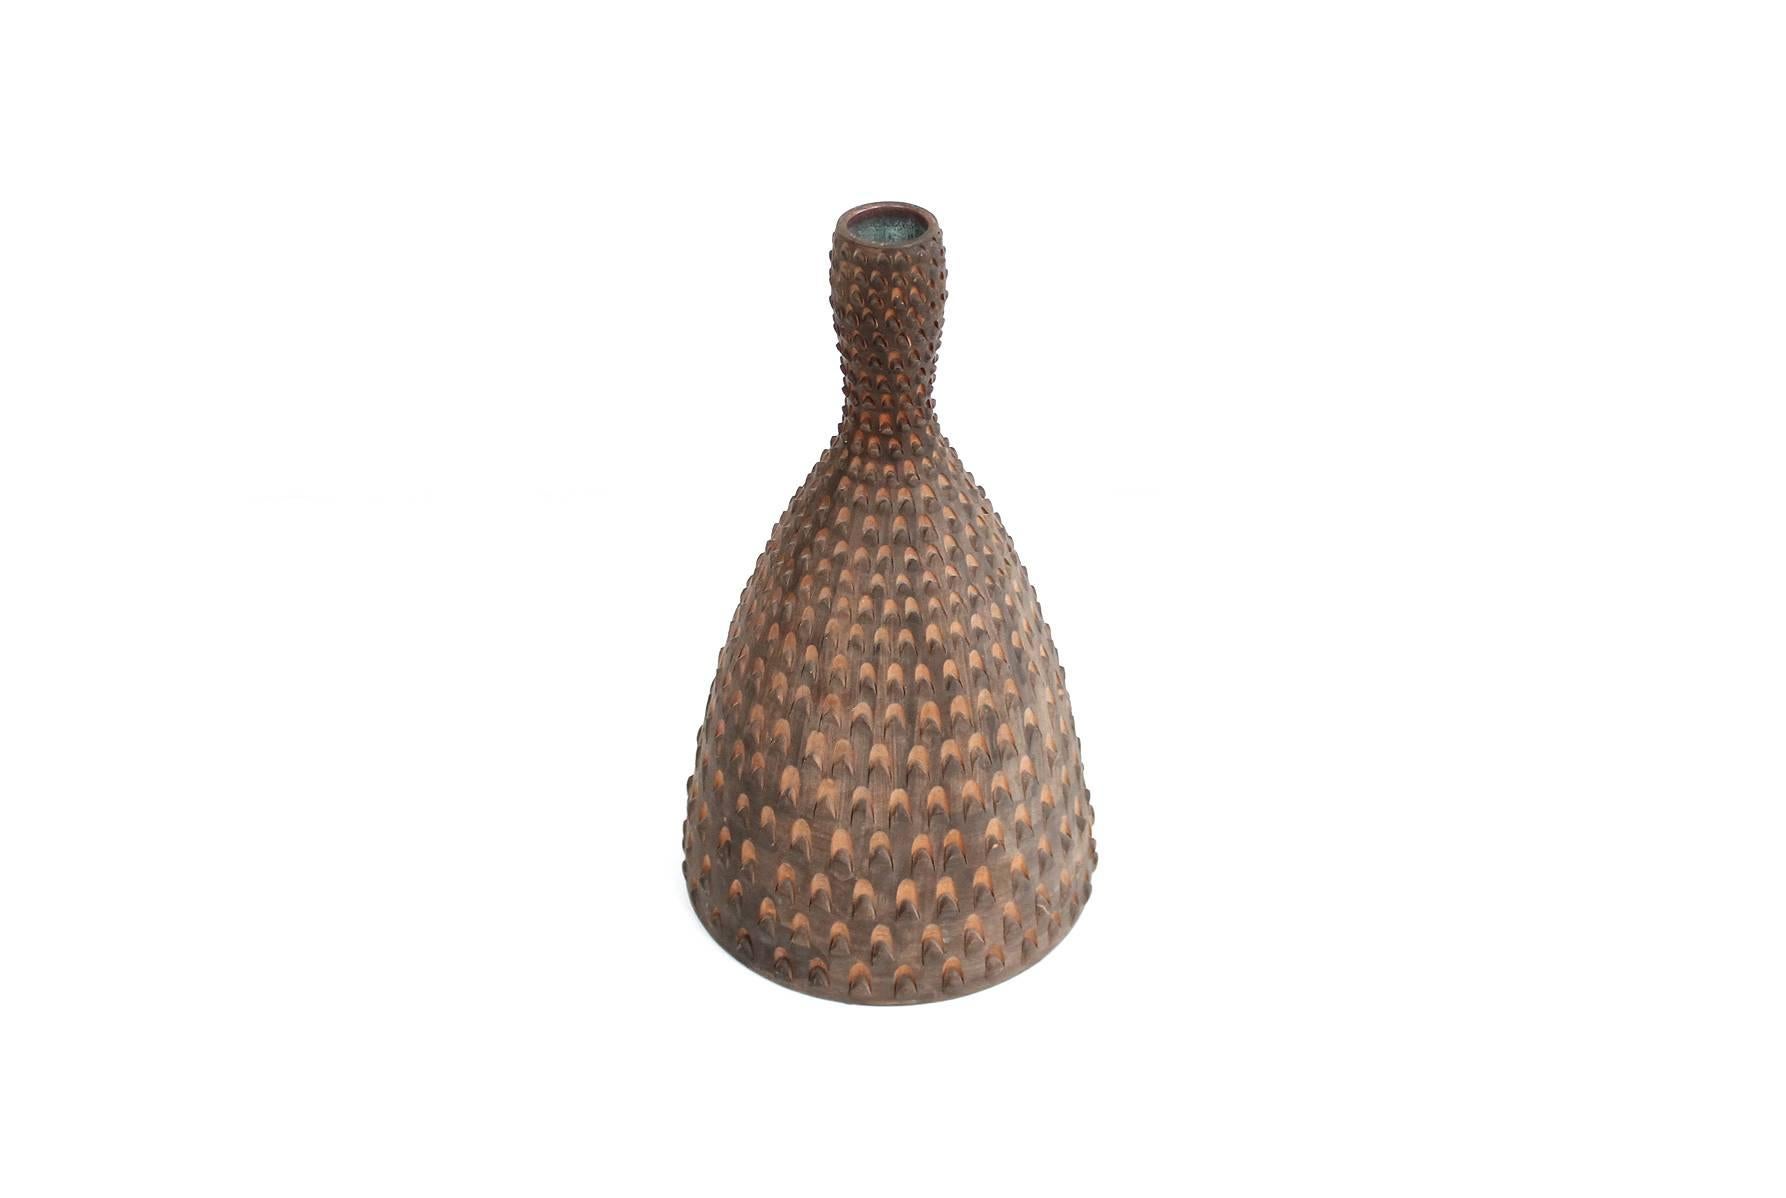 Stunning Italian pottery vase for Raymor. Ceramic body with applied technique that resembles a pinecone and a brilliant aquamarine interior glaze.